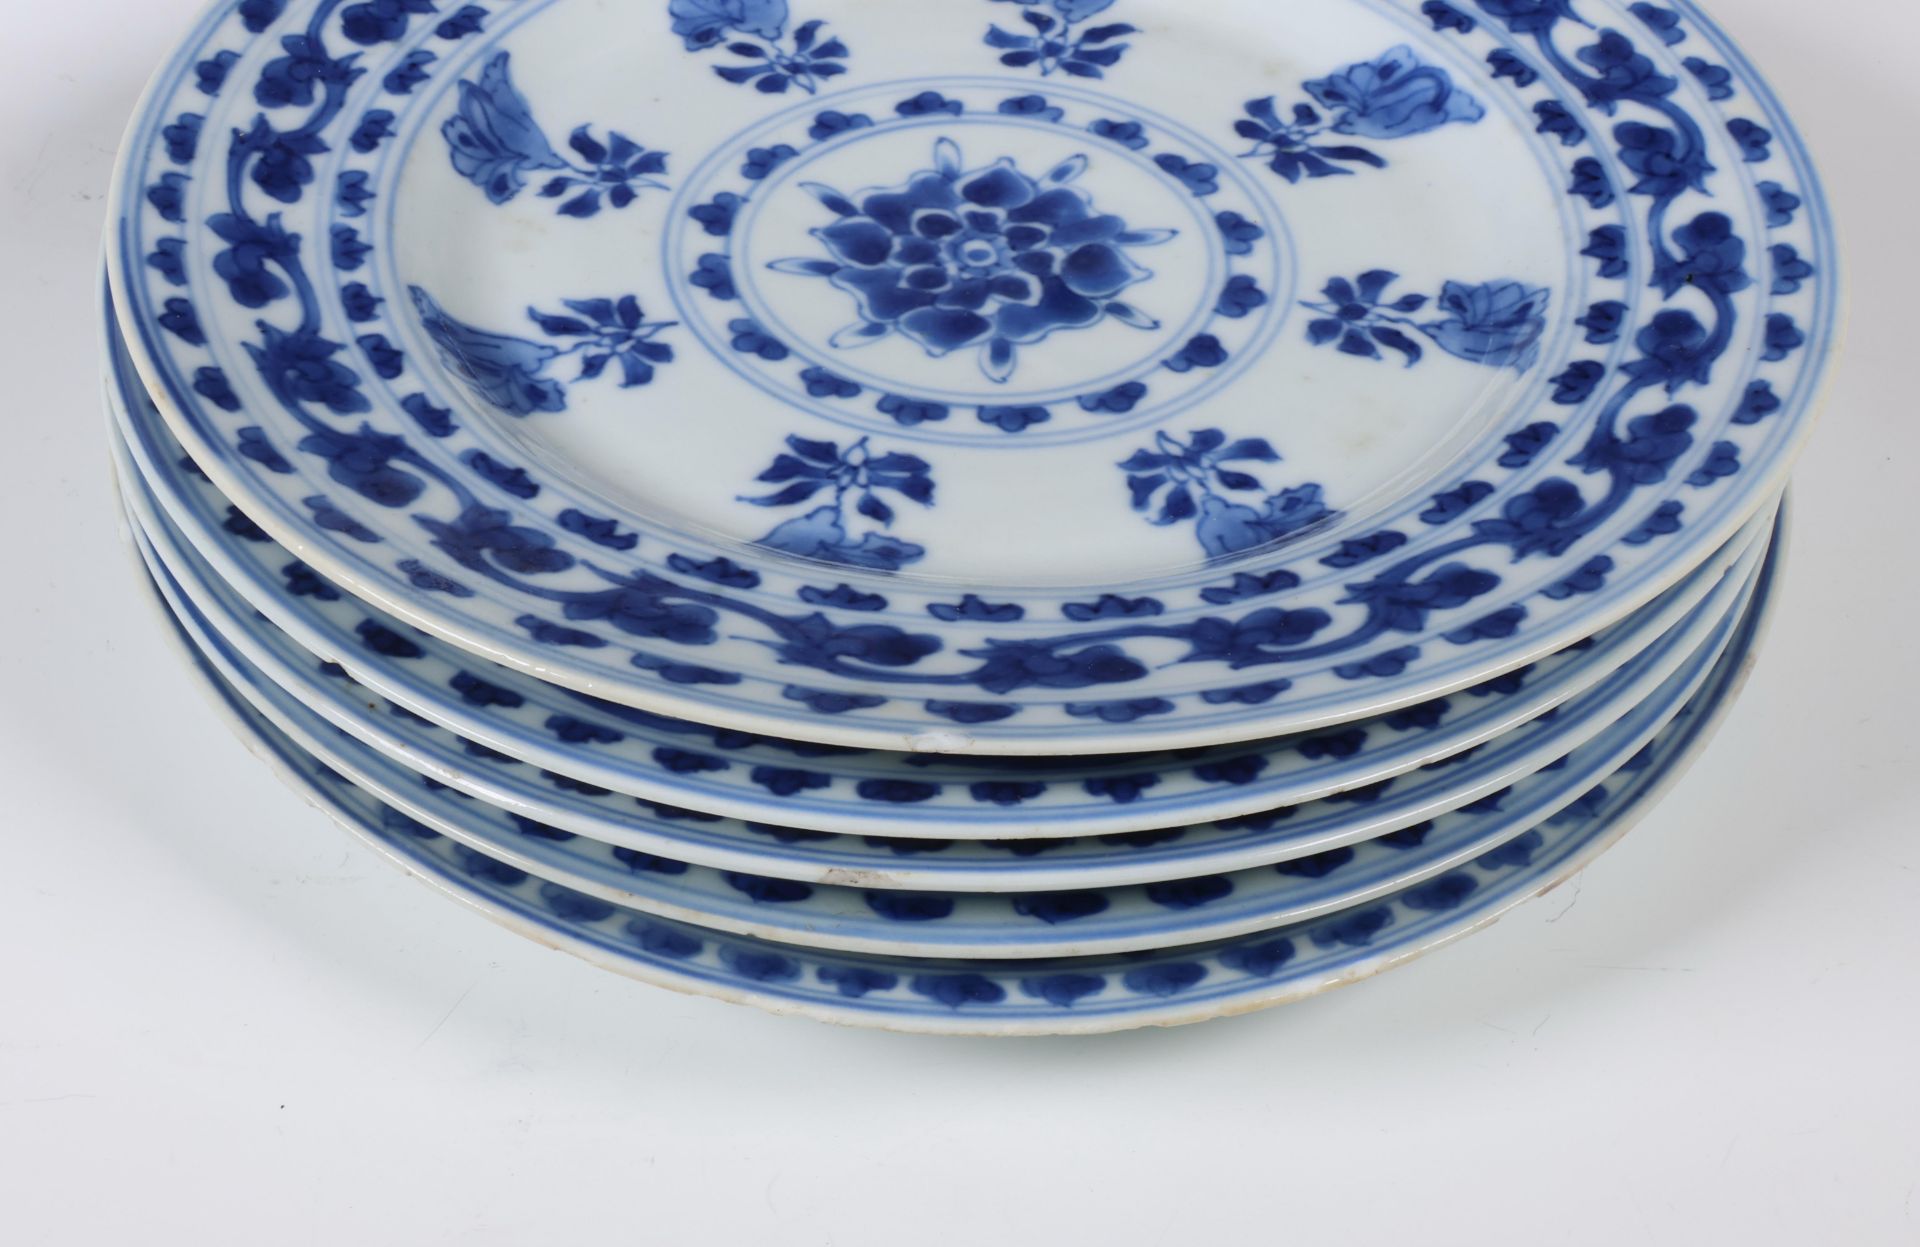 China, set of five blue and white porcelain plates, Kangxi period (1662-1722), - Image 3 of 3